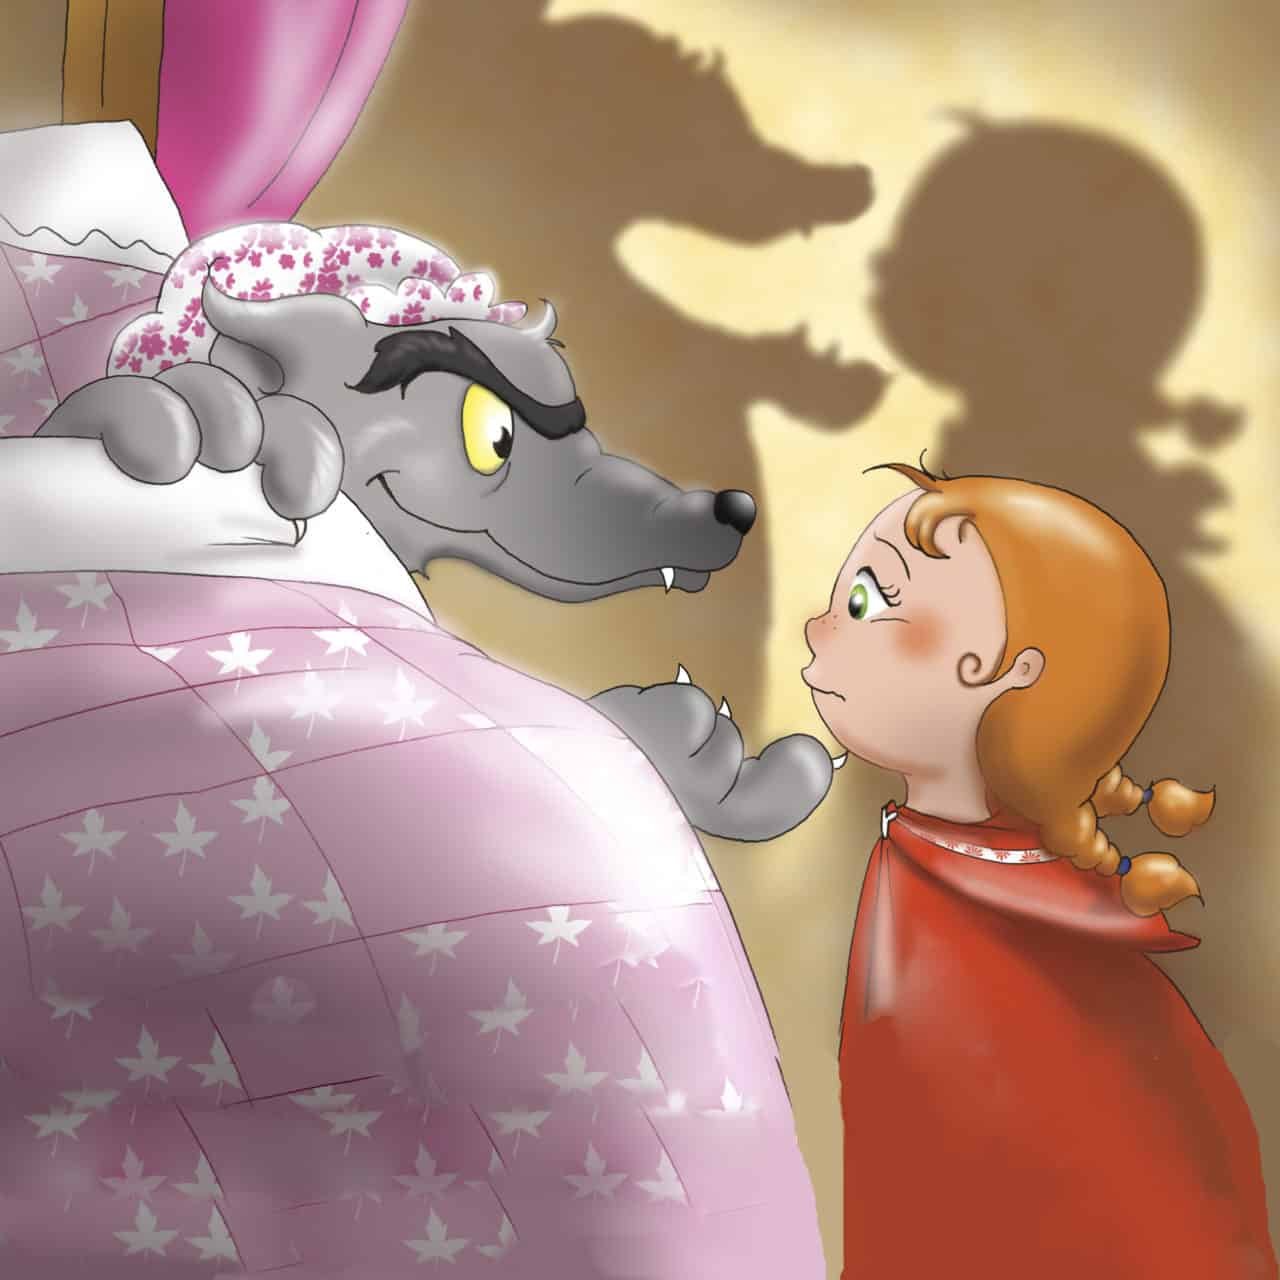 little-red-riding-hood-the-story-home-children-s-audio-stories